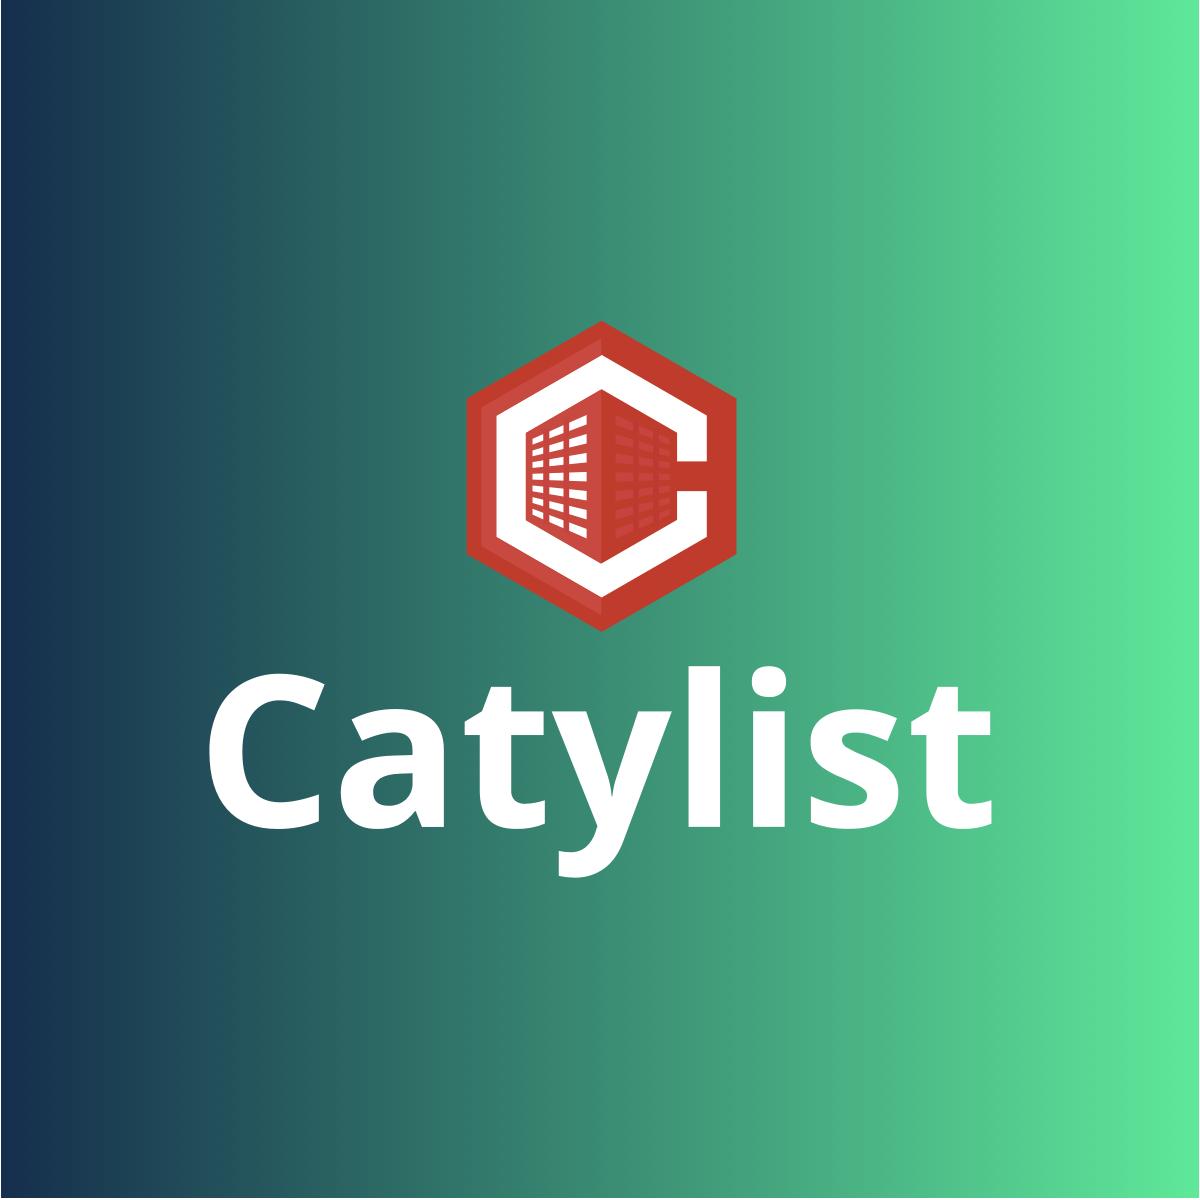 Catylist Commercial Real Estate Technology